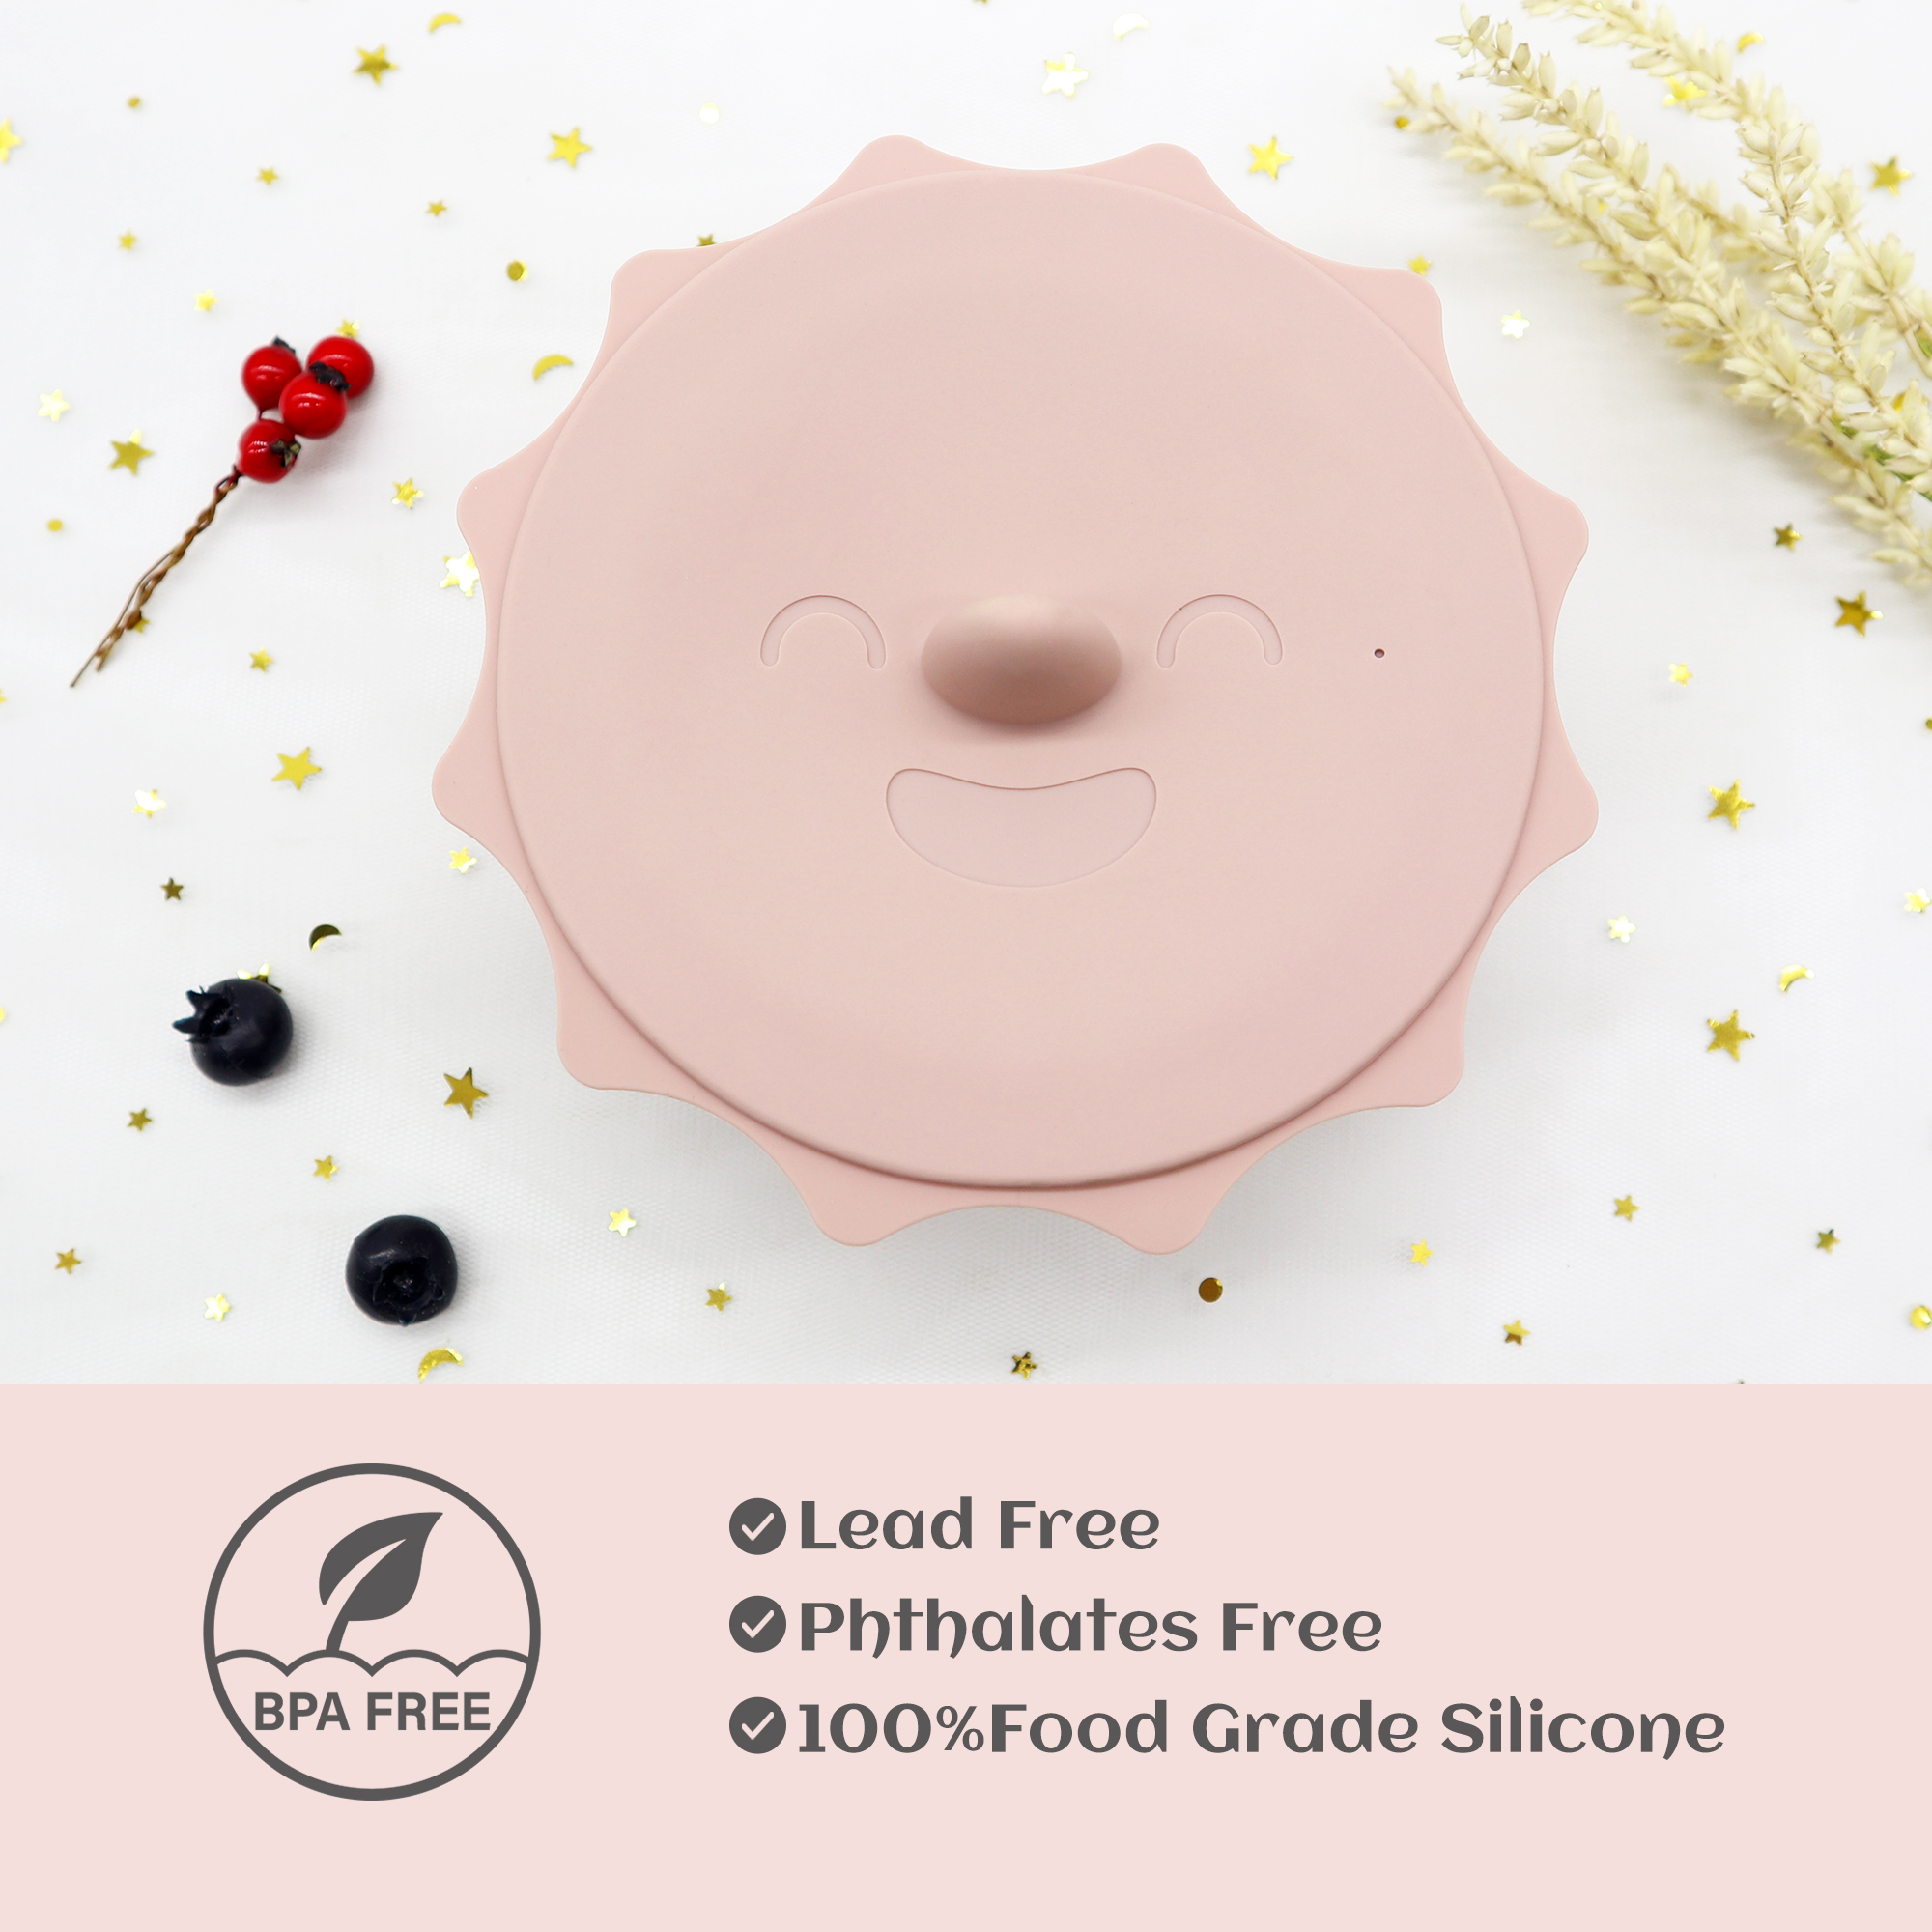 What Are the Essential Safety Certifications for Silicone Baby Bowls l Melikey